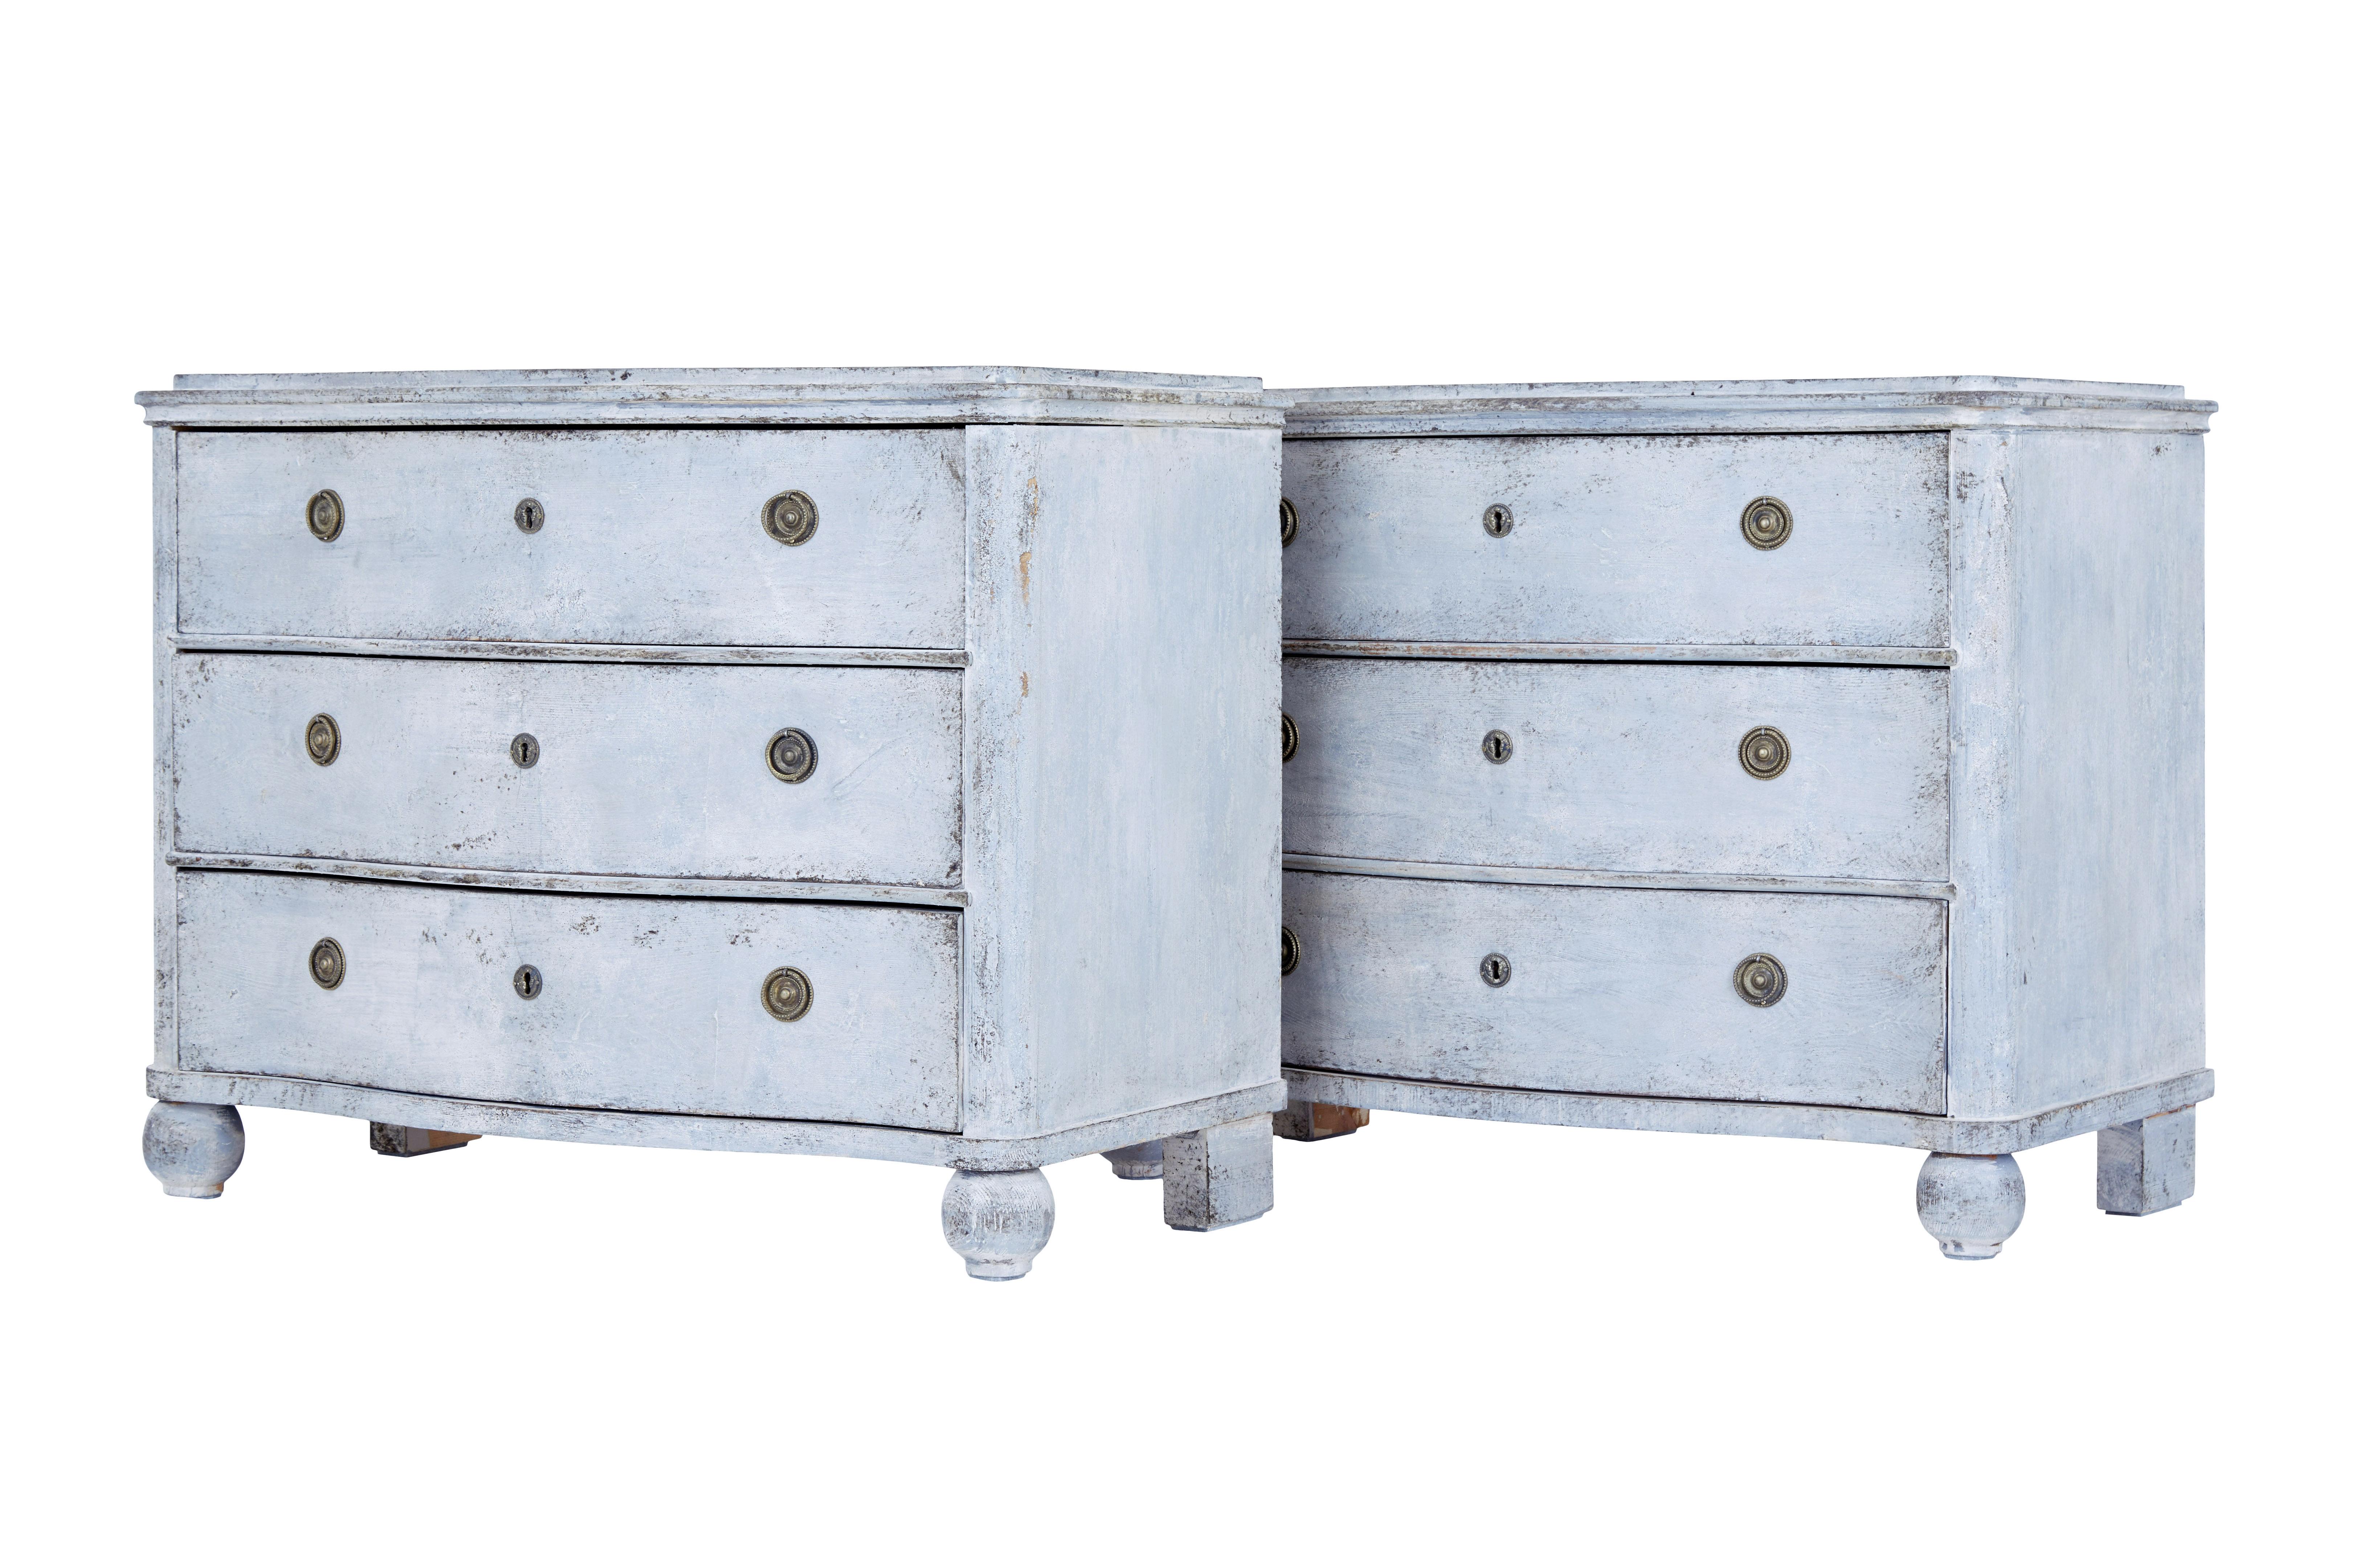 Swedish pair of mid-19th century painted chest of drawers.

Fine quality pair of shaped oak and painted commodes circa 1860.

Serpentine shaped top surface with moulded edge, below which each chest has 3 shaped drawers of equal proportions,